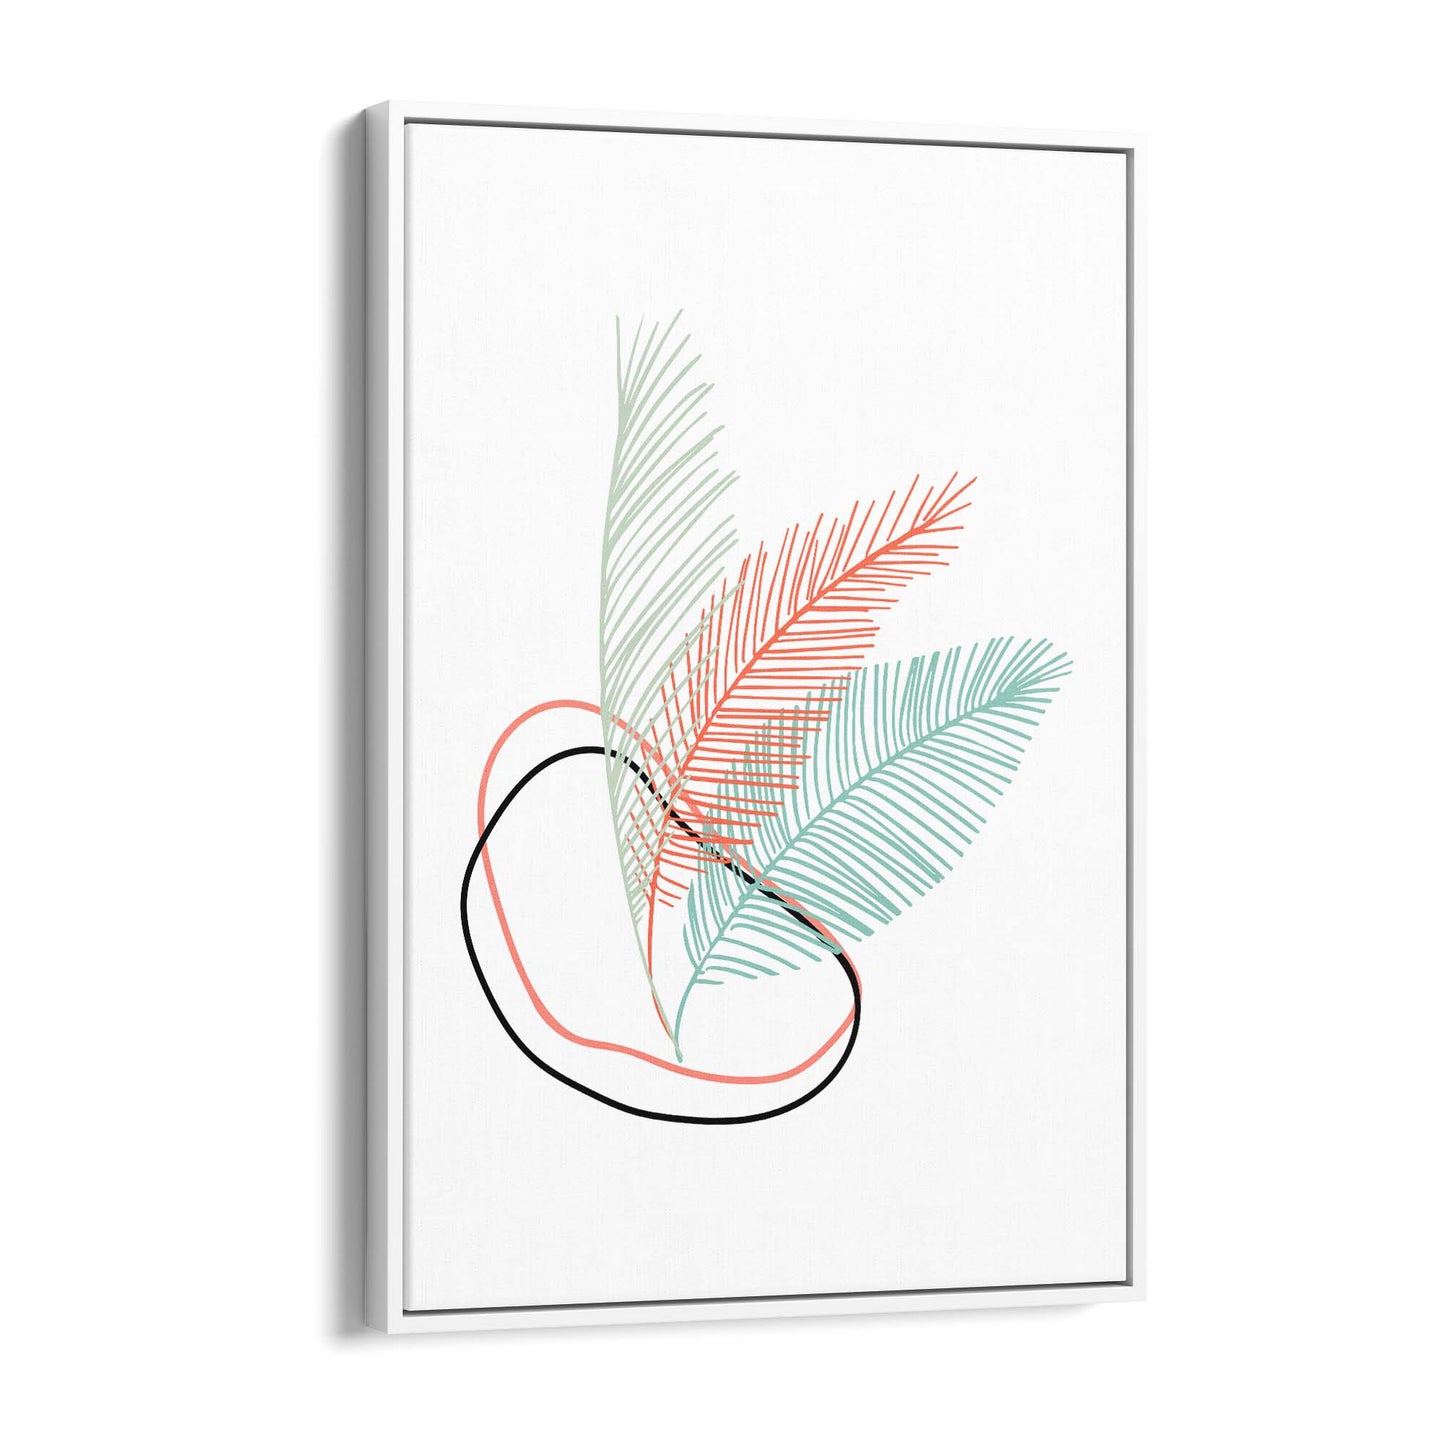 Minimal Feather Neon Abstract Design Wall Art #1 - The Affordable Art Company